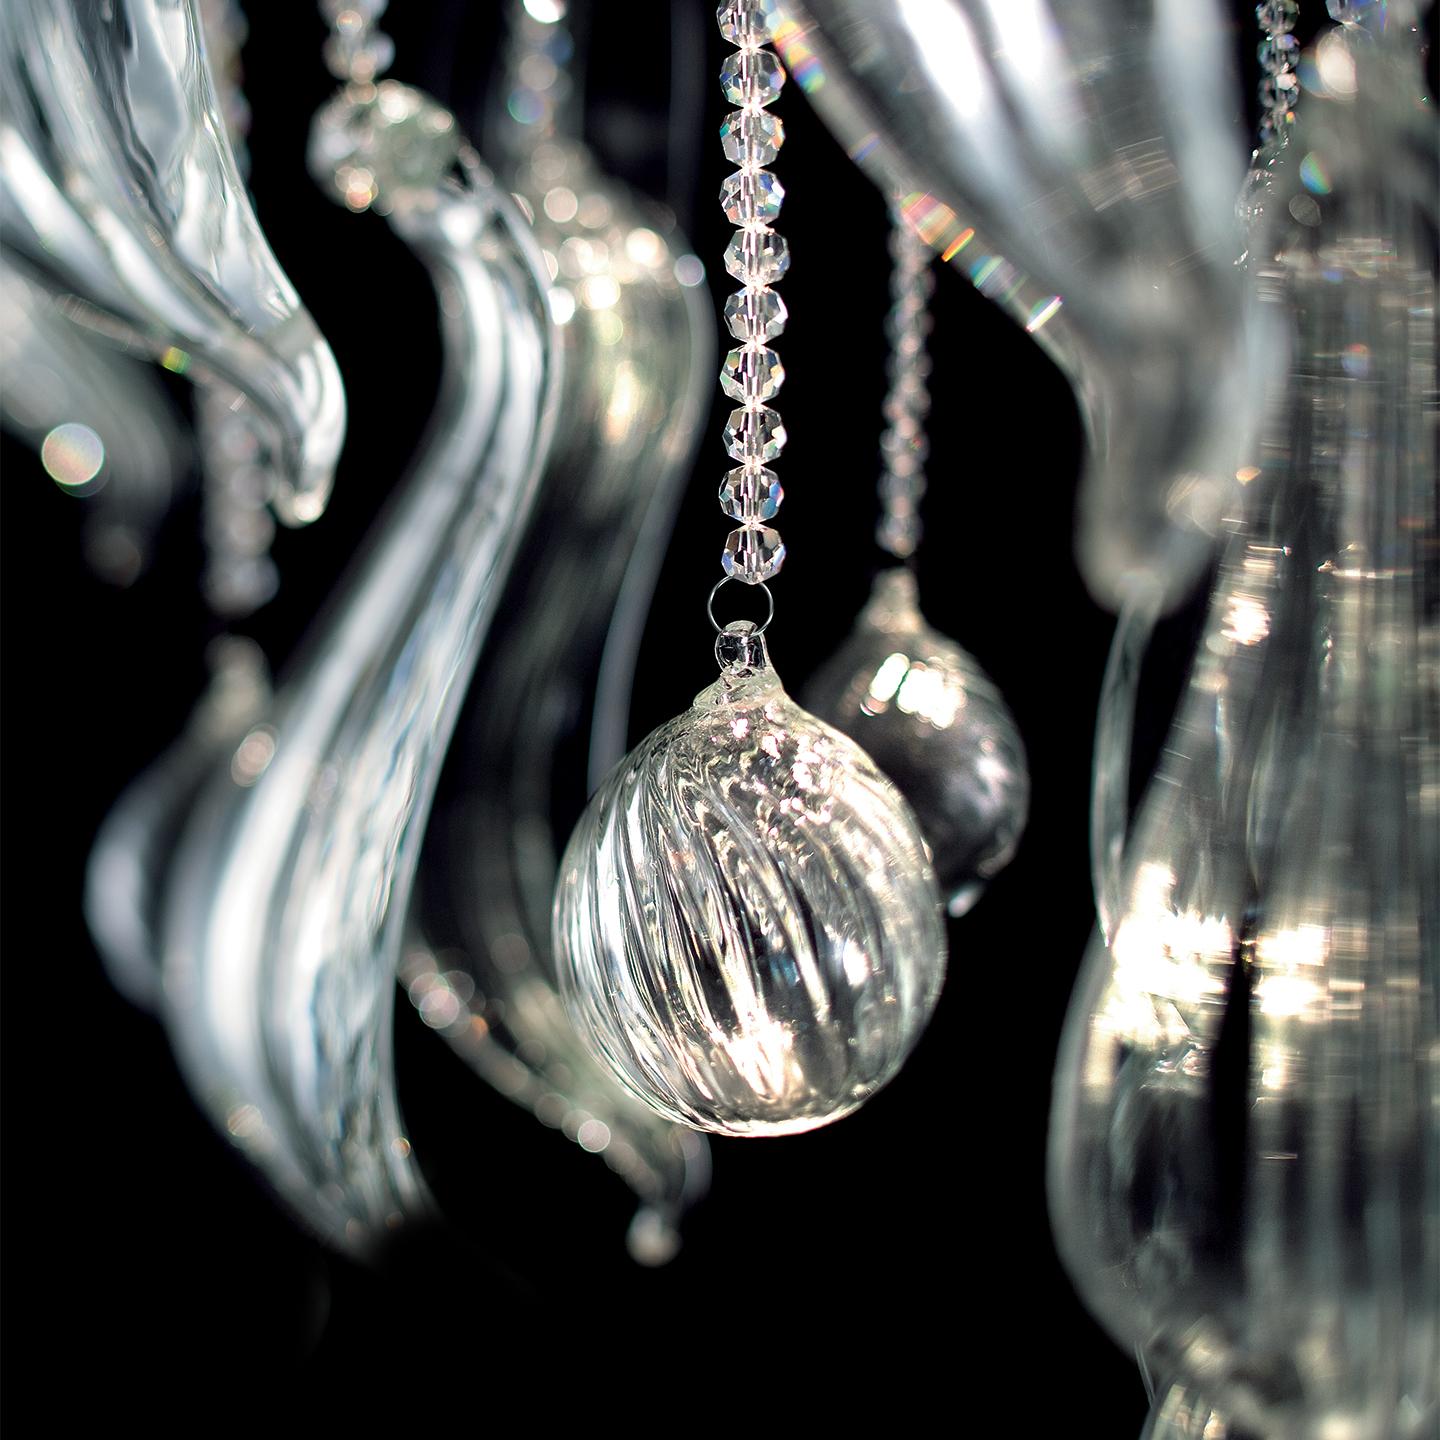 The Elysée Ceiling Lamp evokes the traditional style of a Murano chandelier, but with a modern twist. Designed by Marina Toscano, Elysée is composed of translucent, hand blown Italian glass tendrils that break out into sculptural, LED-illuminated